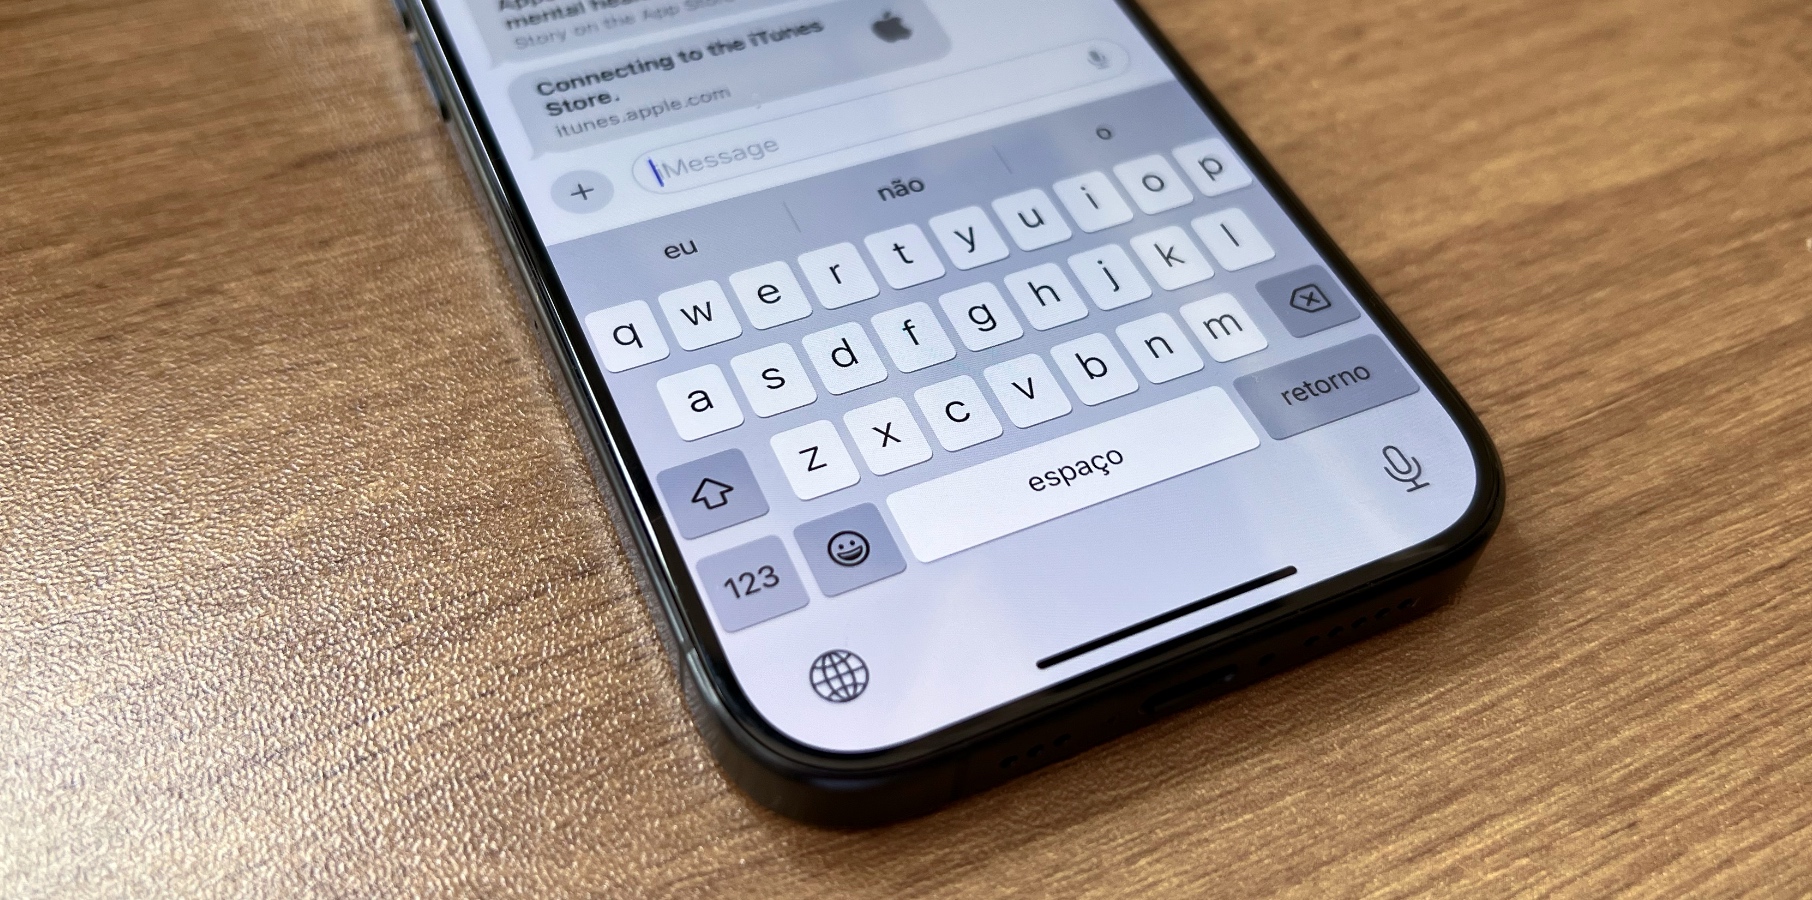 Say Goodbye to Tedious Number Typing with Innovative iPhone Keyboard Trick